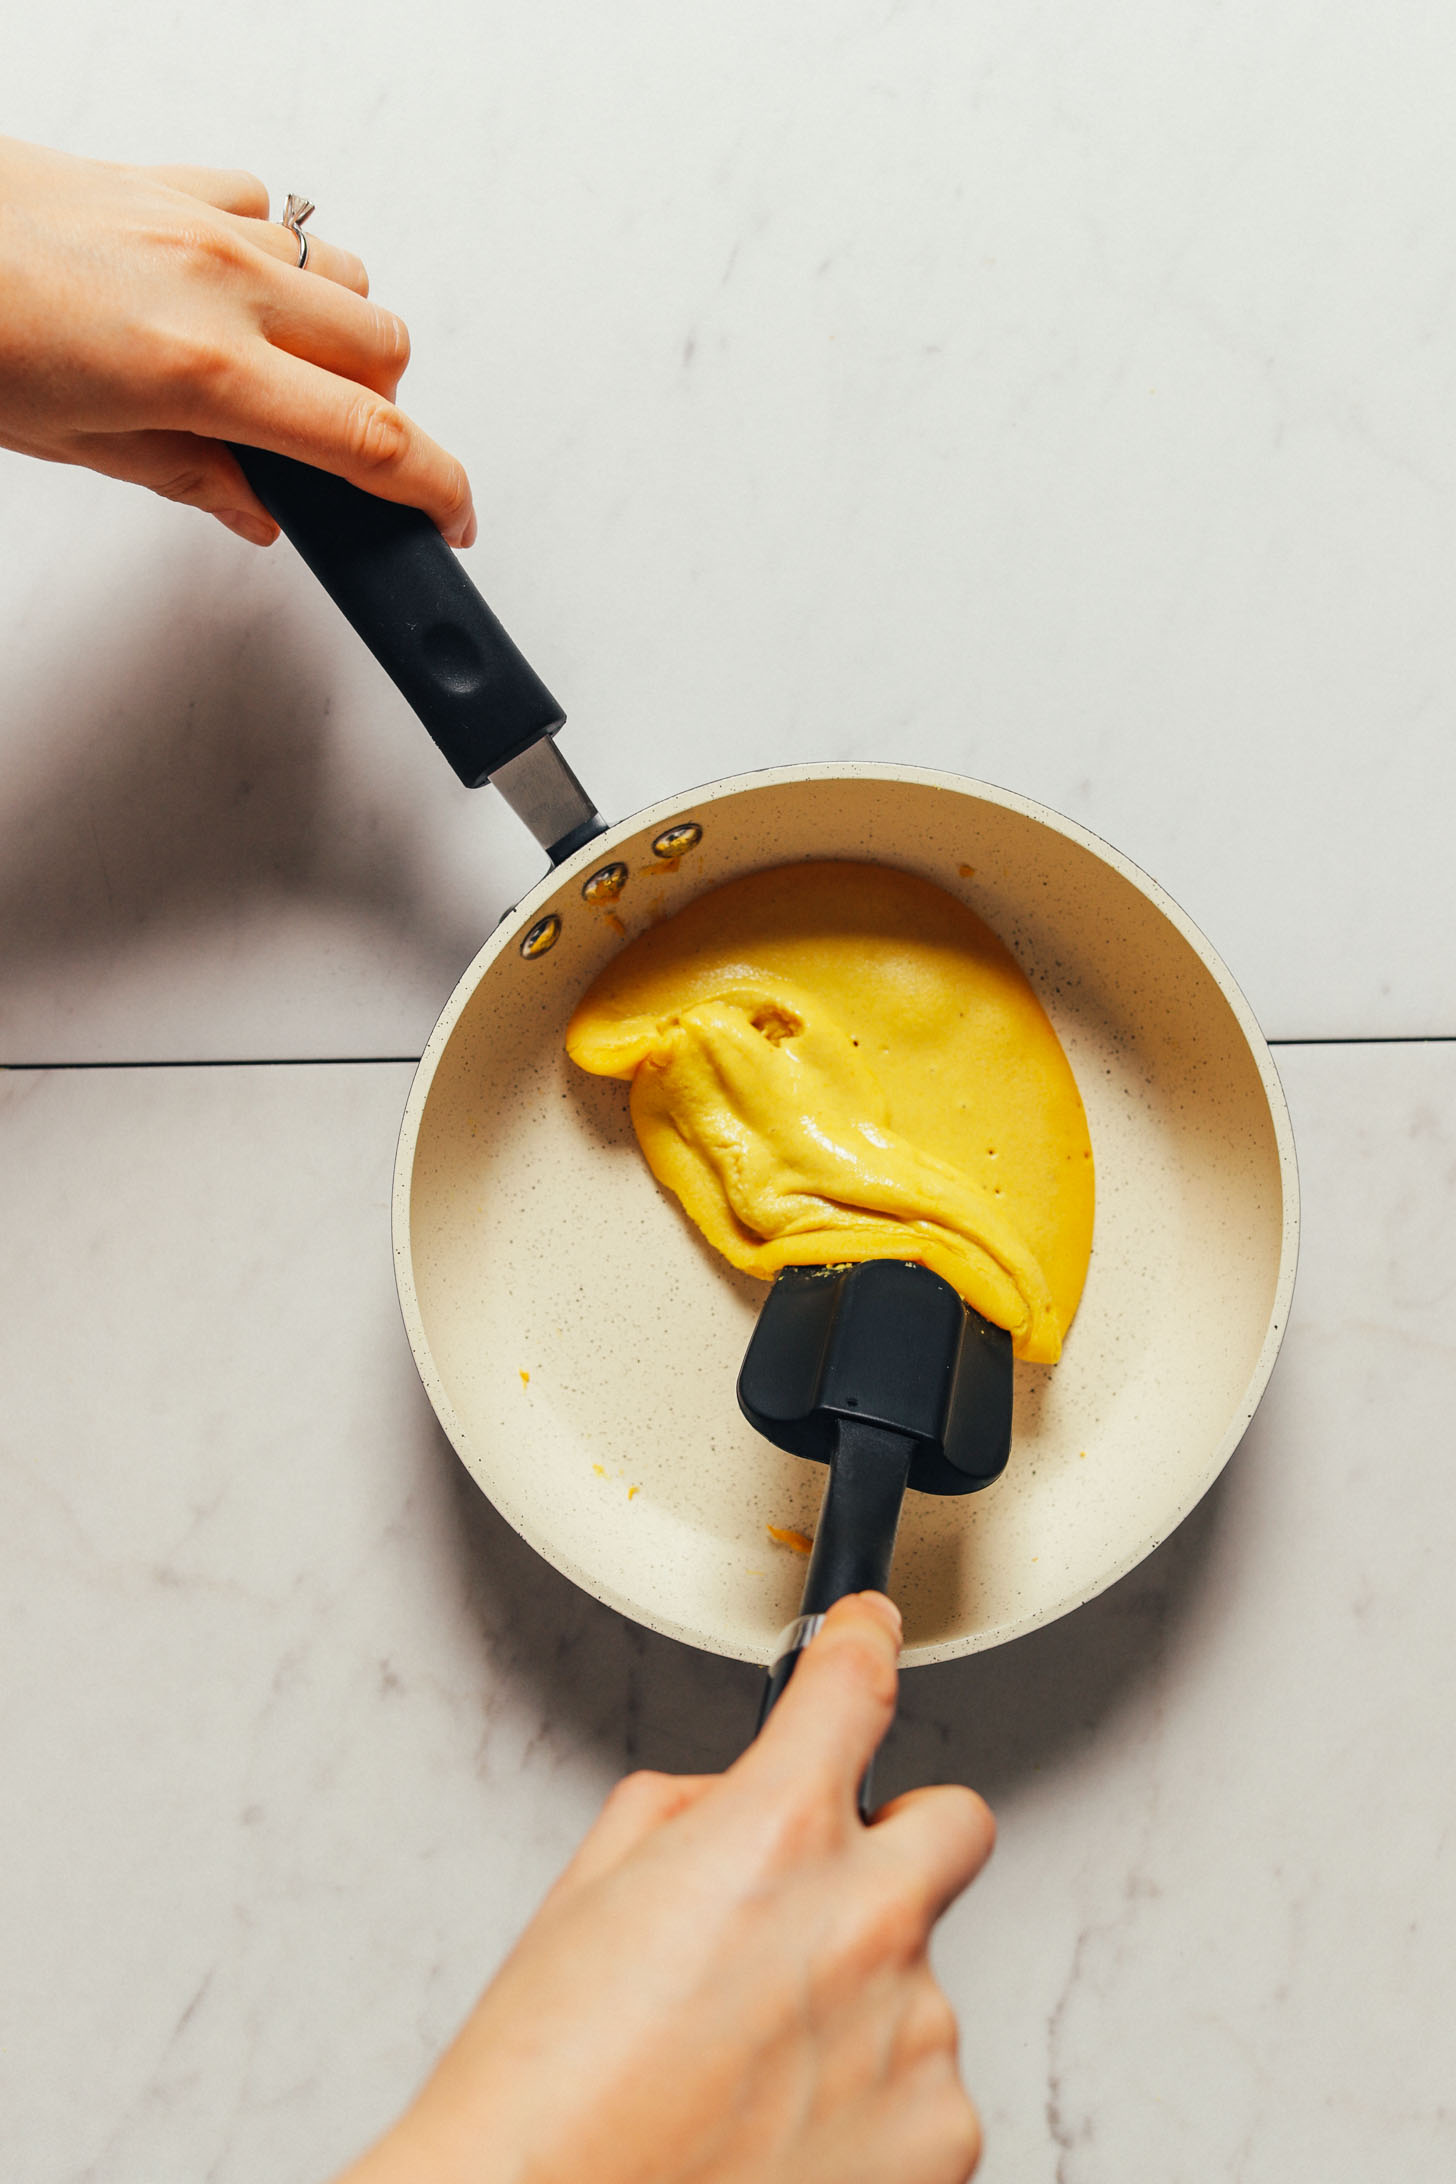 Using a rubber spatula to cook a vegan egg in a nonstick pan